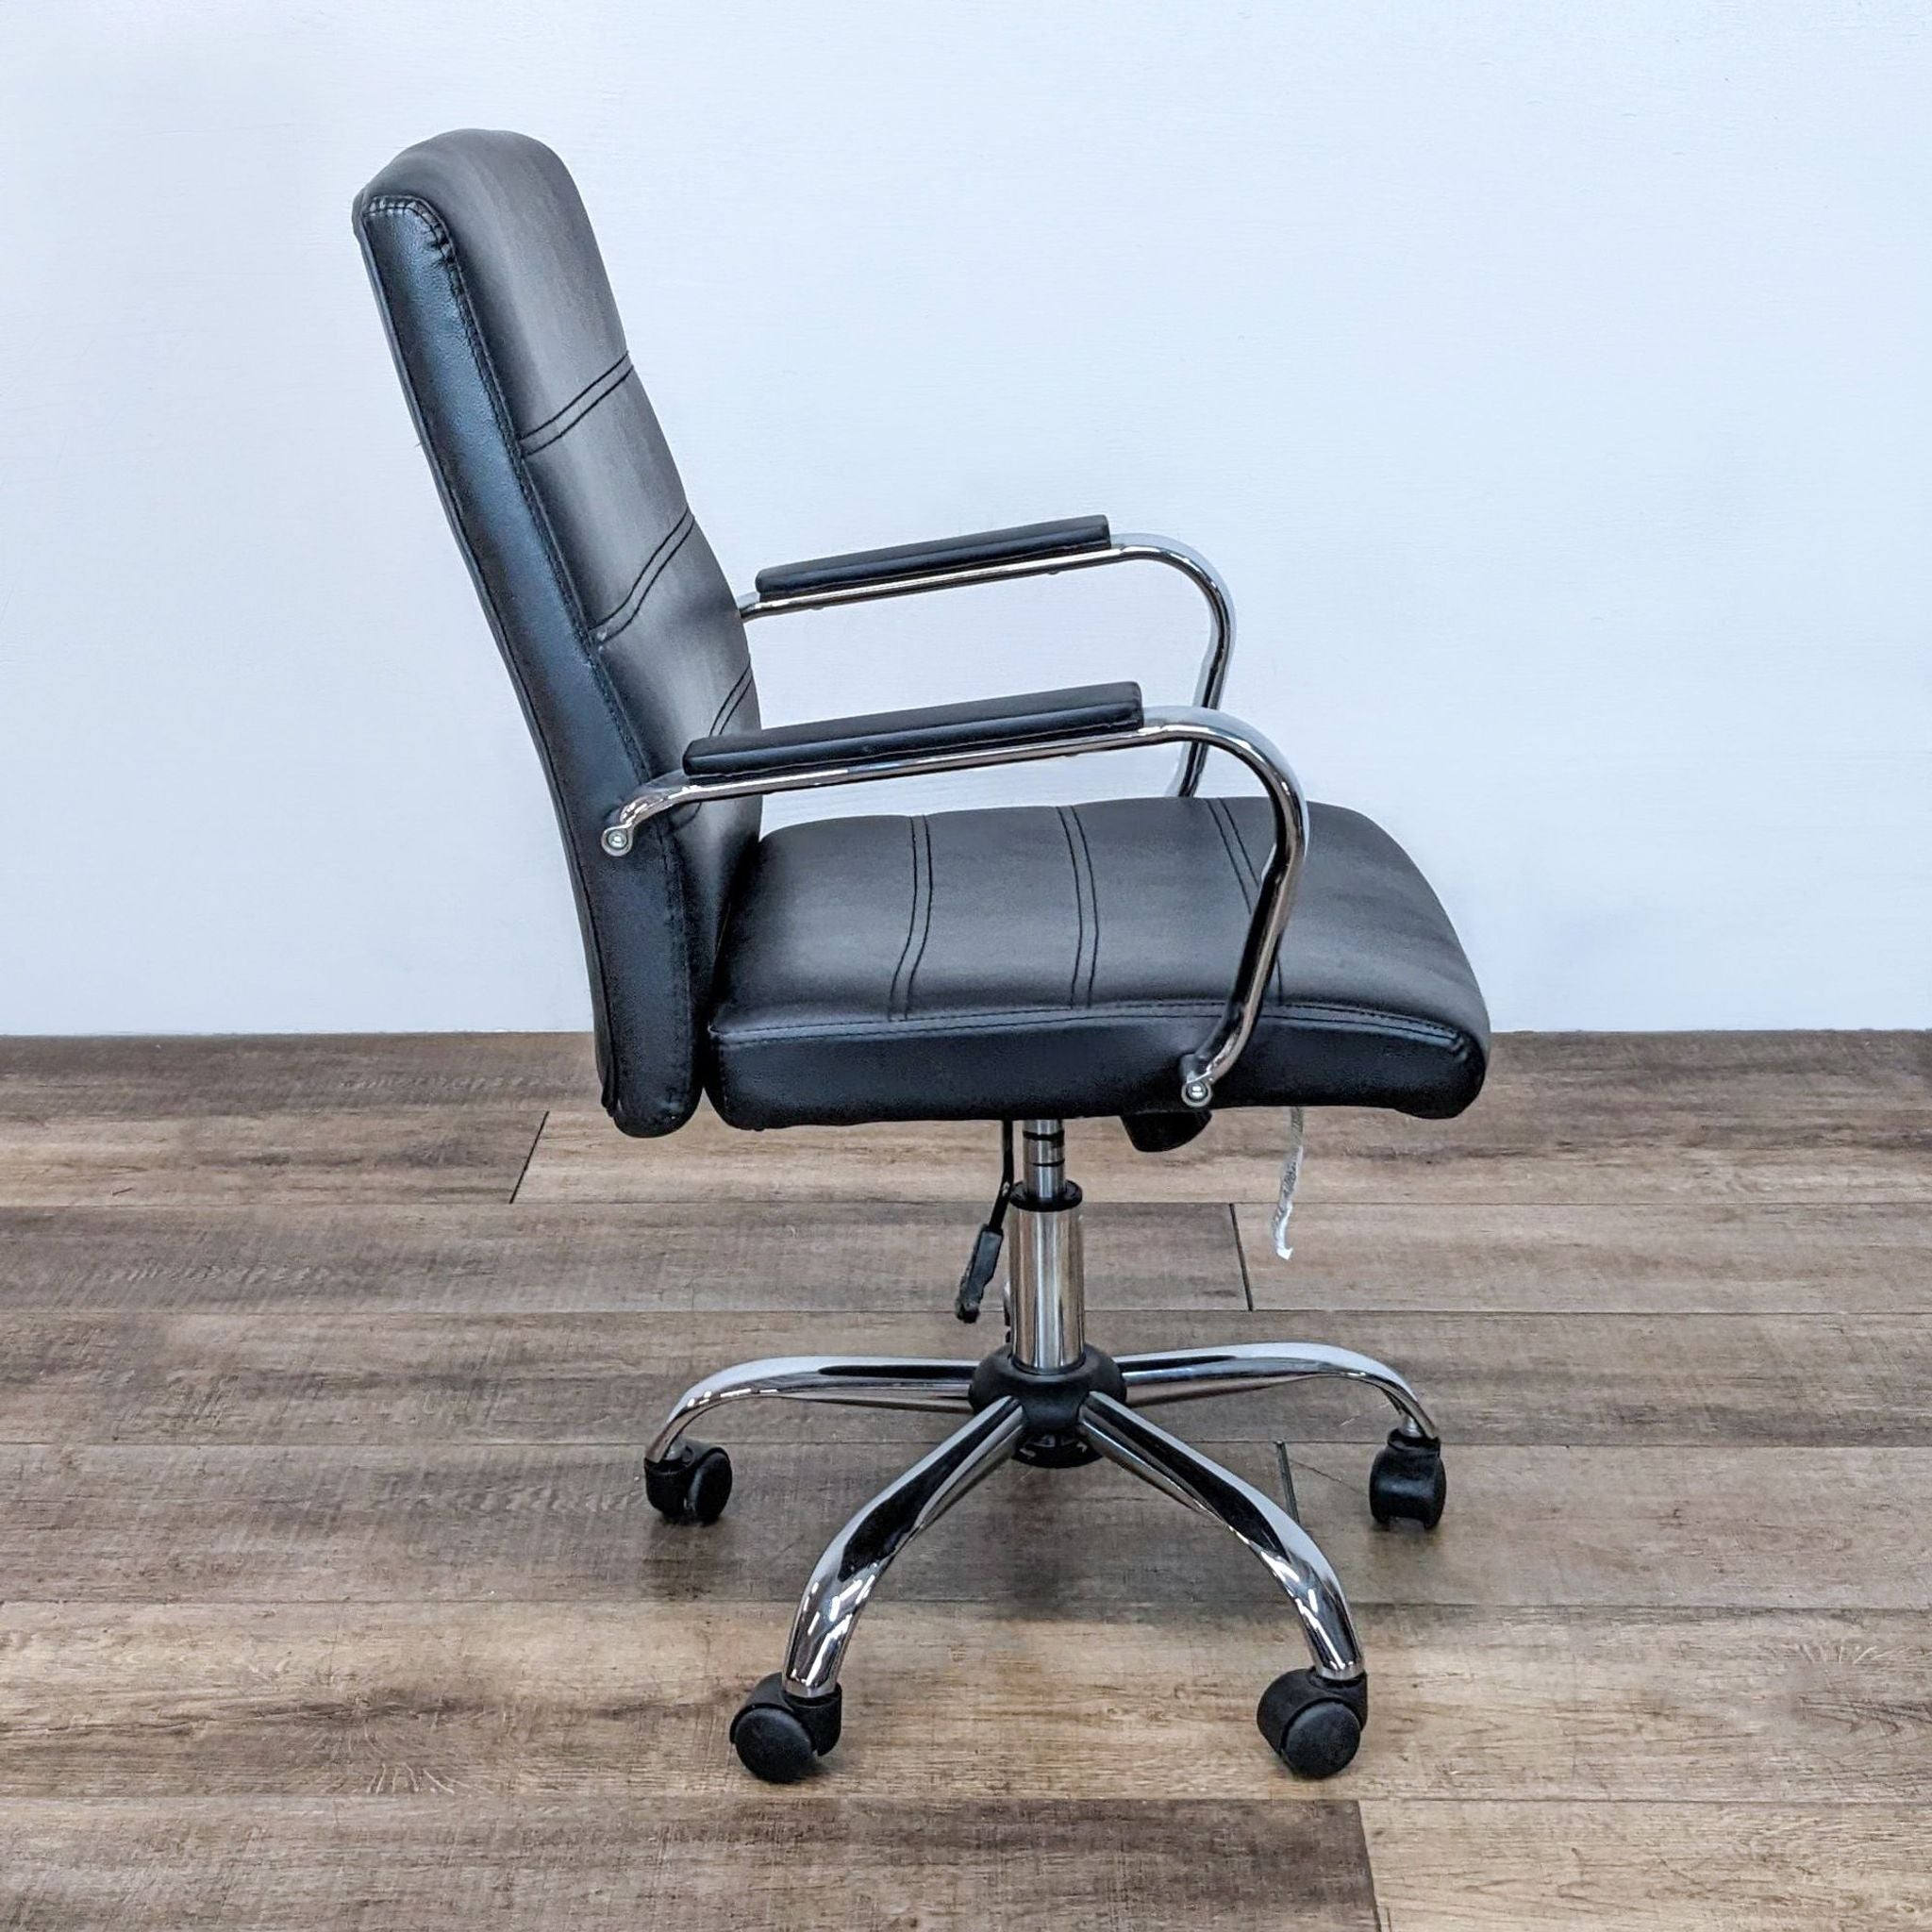 Alt text 2: Black faux leather office chair with 360° swivel seat, chrome details, and wheeled base by Reperch, showcasing side and front views.